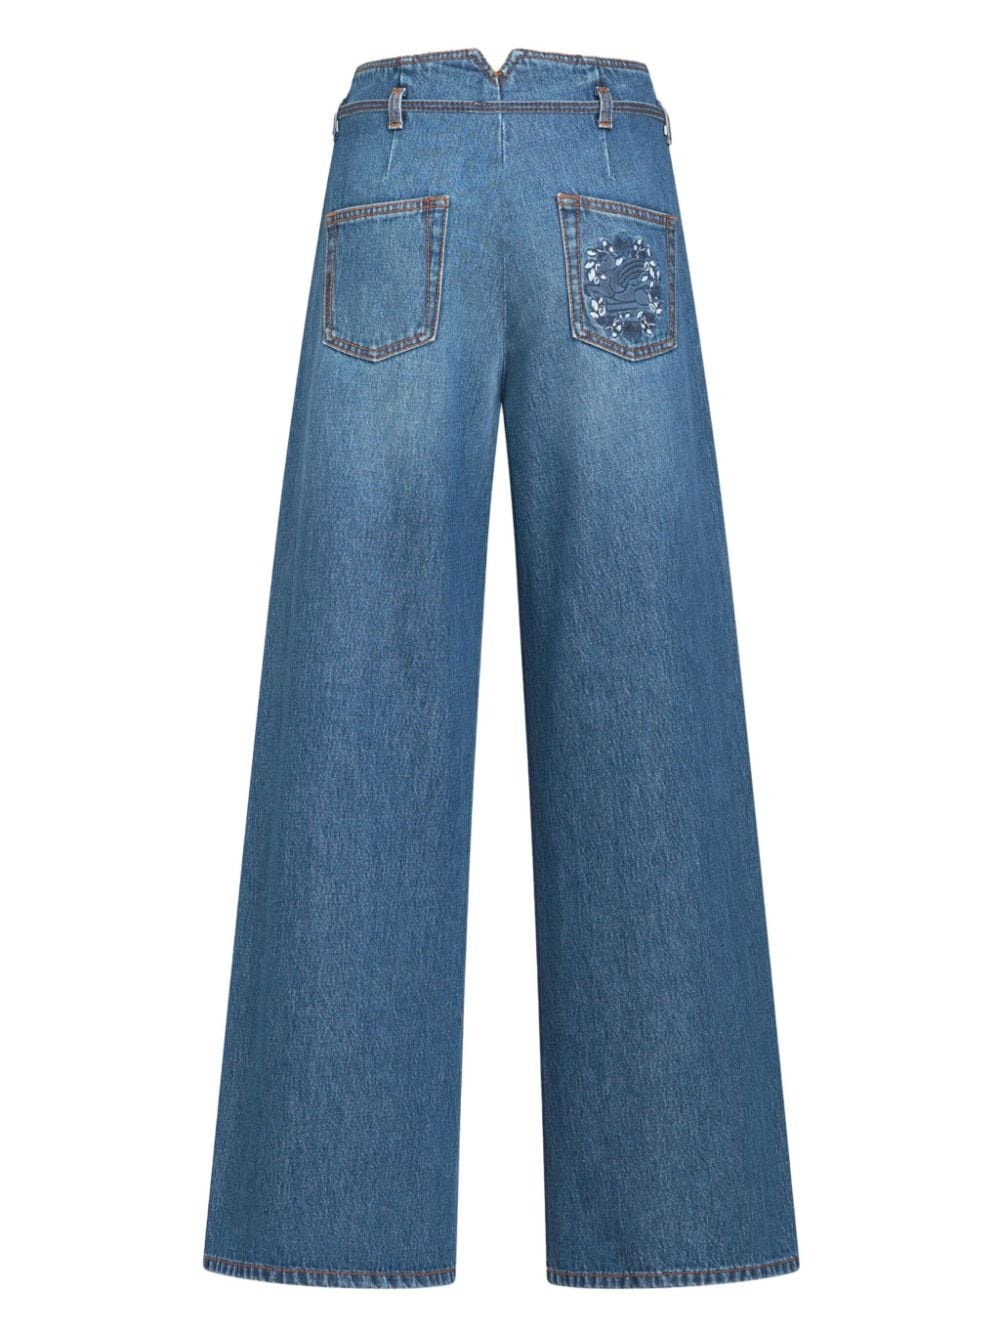 floral-embroidered belted jeans - 7